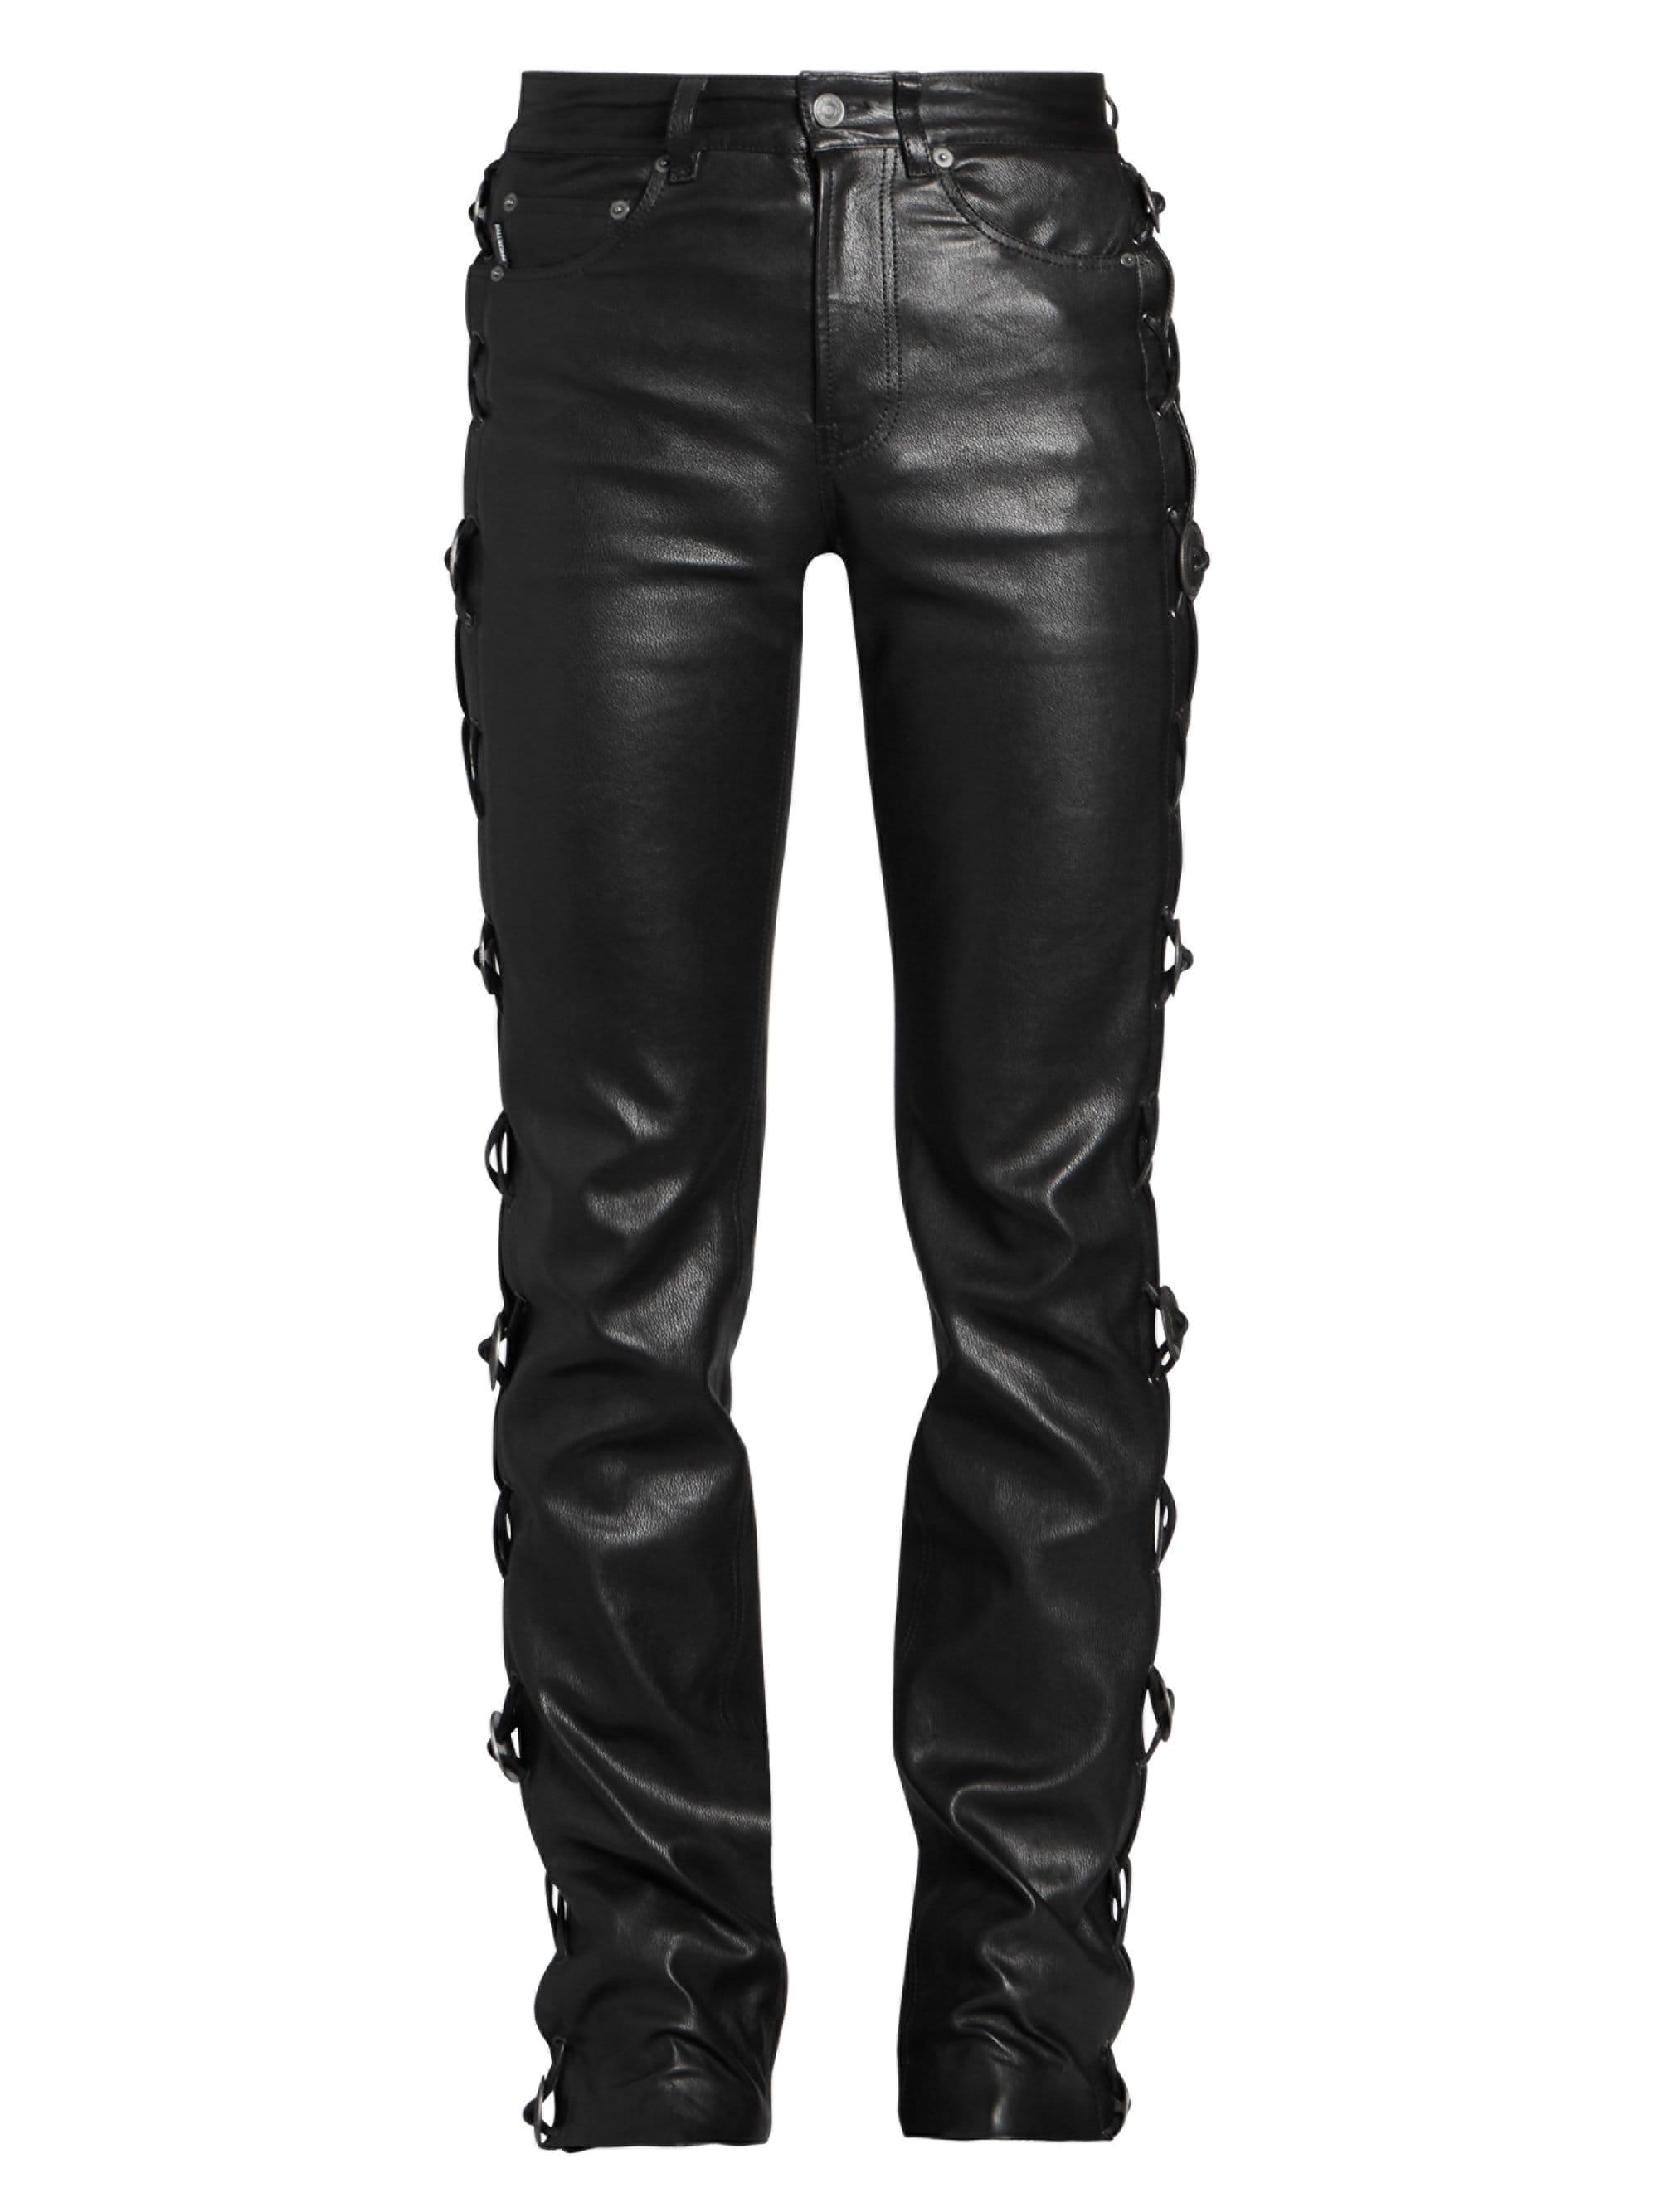 Lyst - Balenciaga Men's Conchos Laced Leather Skinny Pants - Black in ...